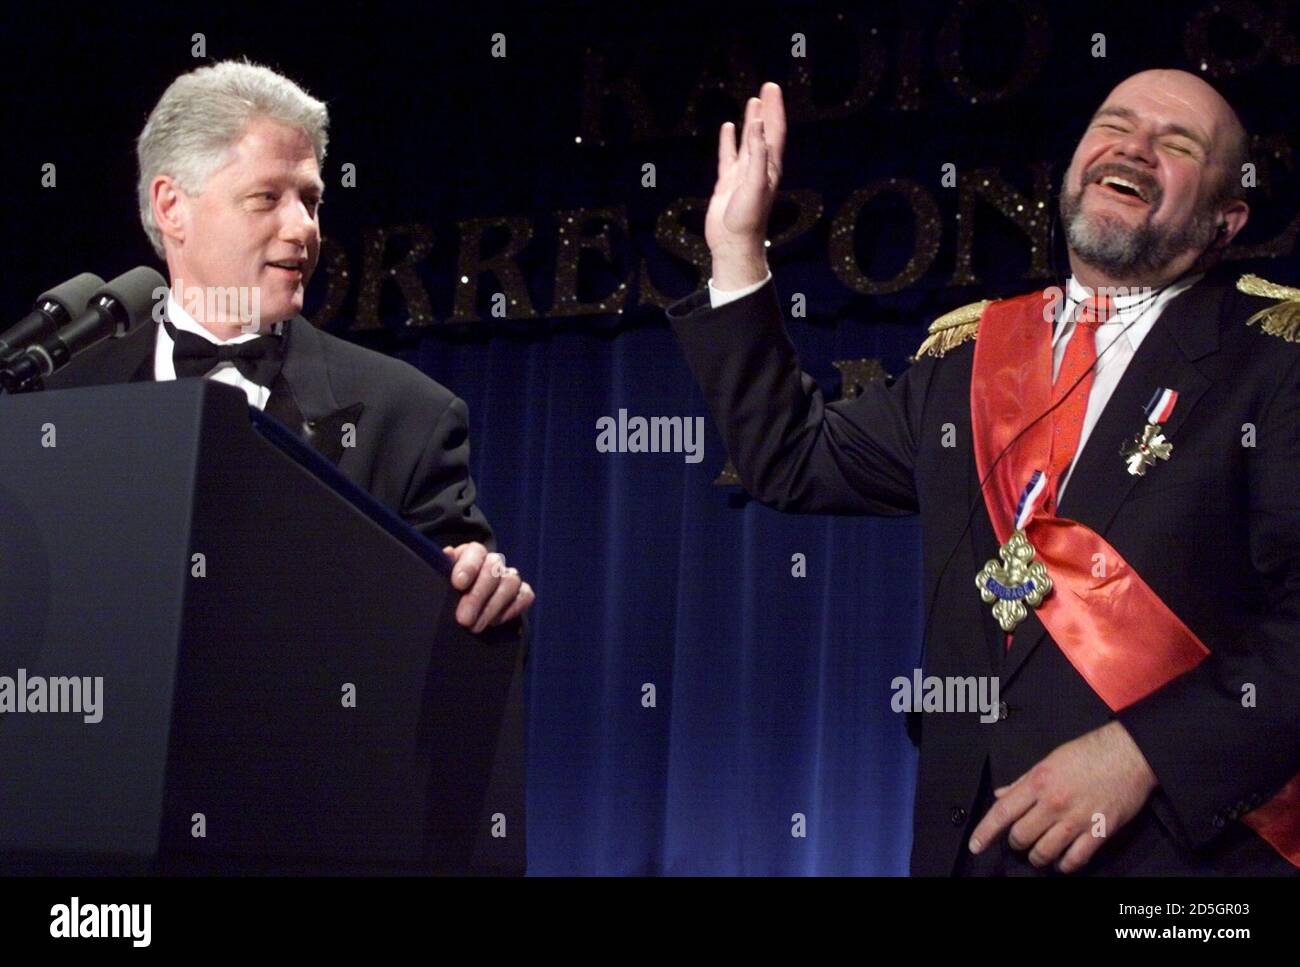 President Clinton and a comedic, ficticious prime minister, perform a comedy skit during the Radio and Television's Correspondents Dinner in Washington, March 18. The president will hold a national televised news conference from the East Room of the White House March 19.  LSD/HB/AA Stock Photo